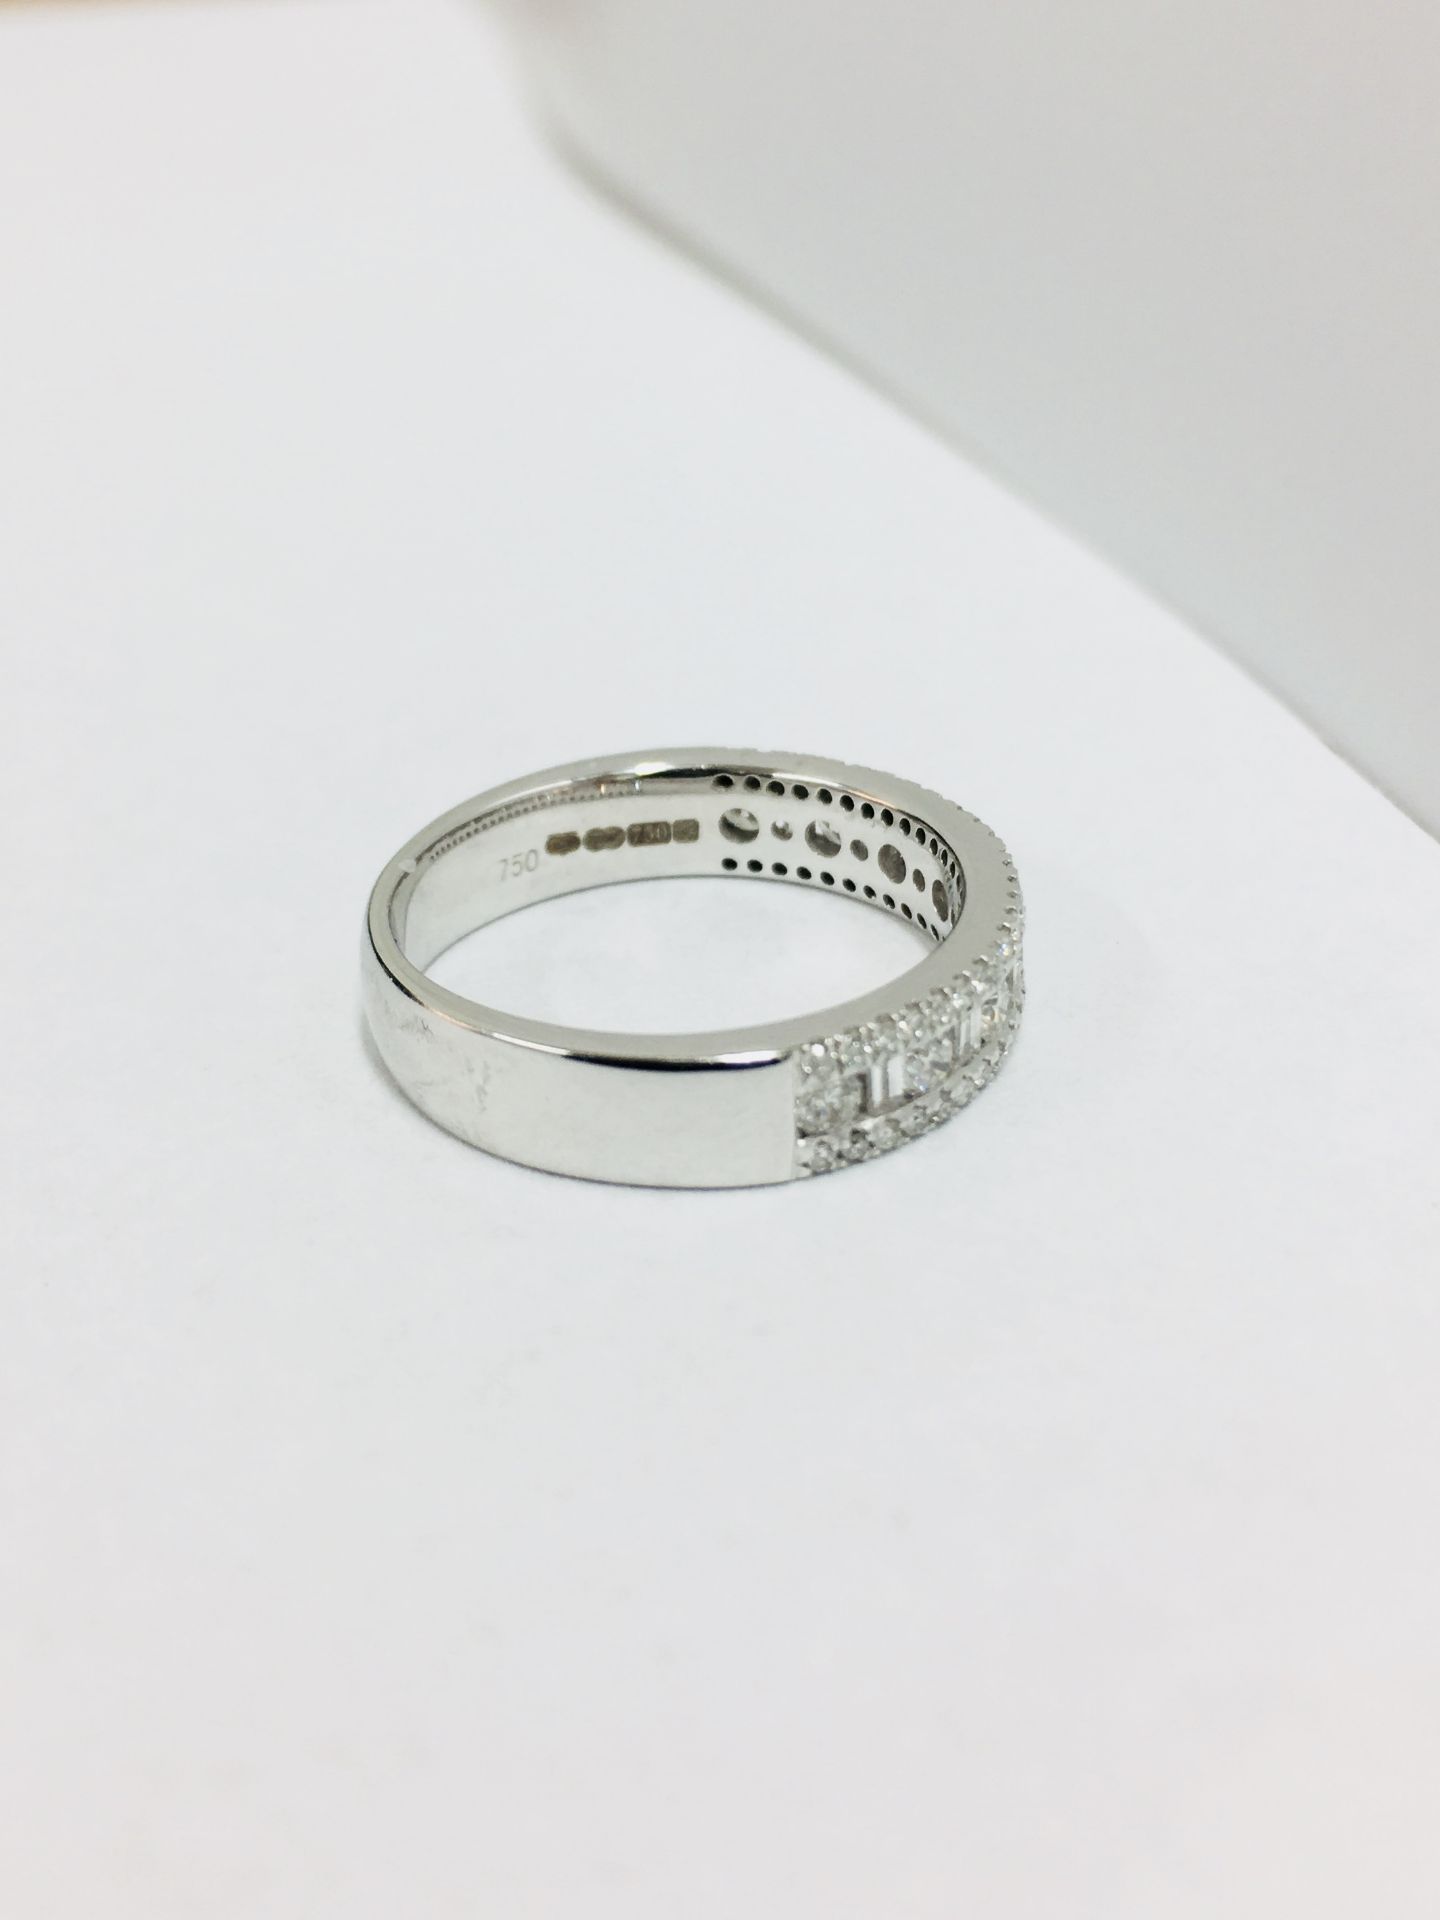 18ct white gold diamond dress ring,0.50ct diamond round and baguette h colour vs clarity,4.08gms - Image 3 of 4